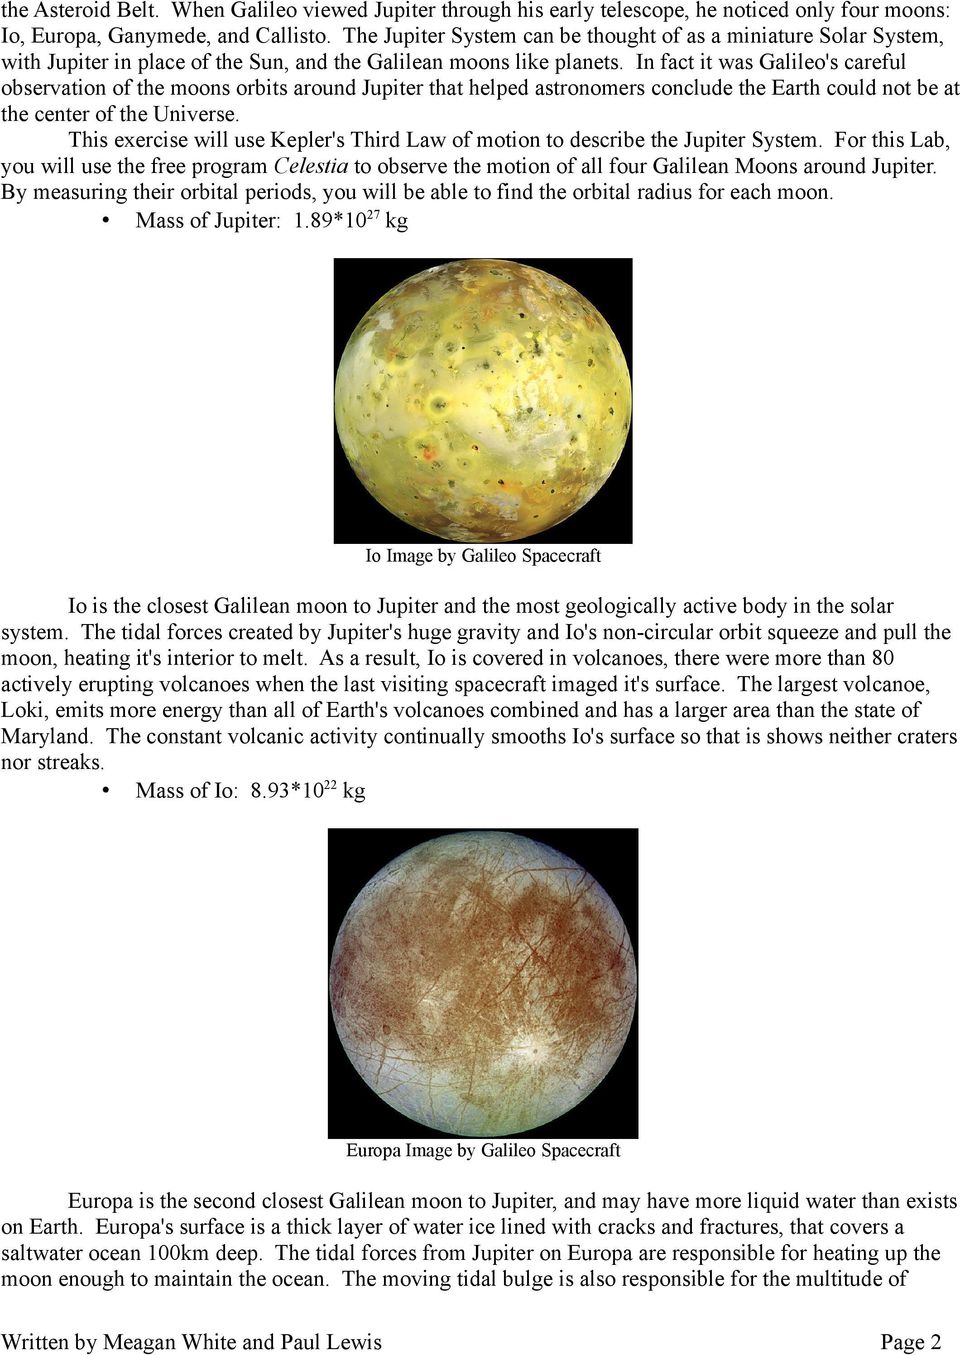 In fact it was Galileo's careful observation of the moons orbits around Jupiter that helped astronomers conclude the Earth could not be at the center of the Universe.